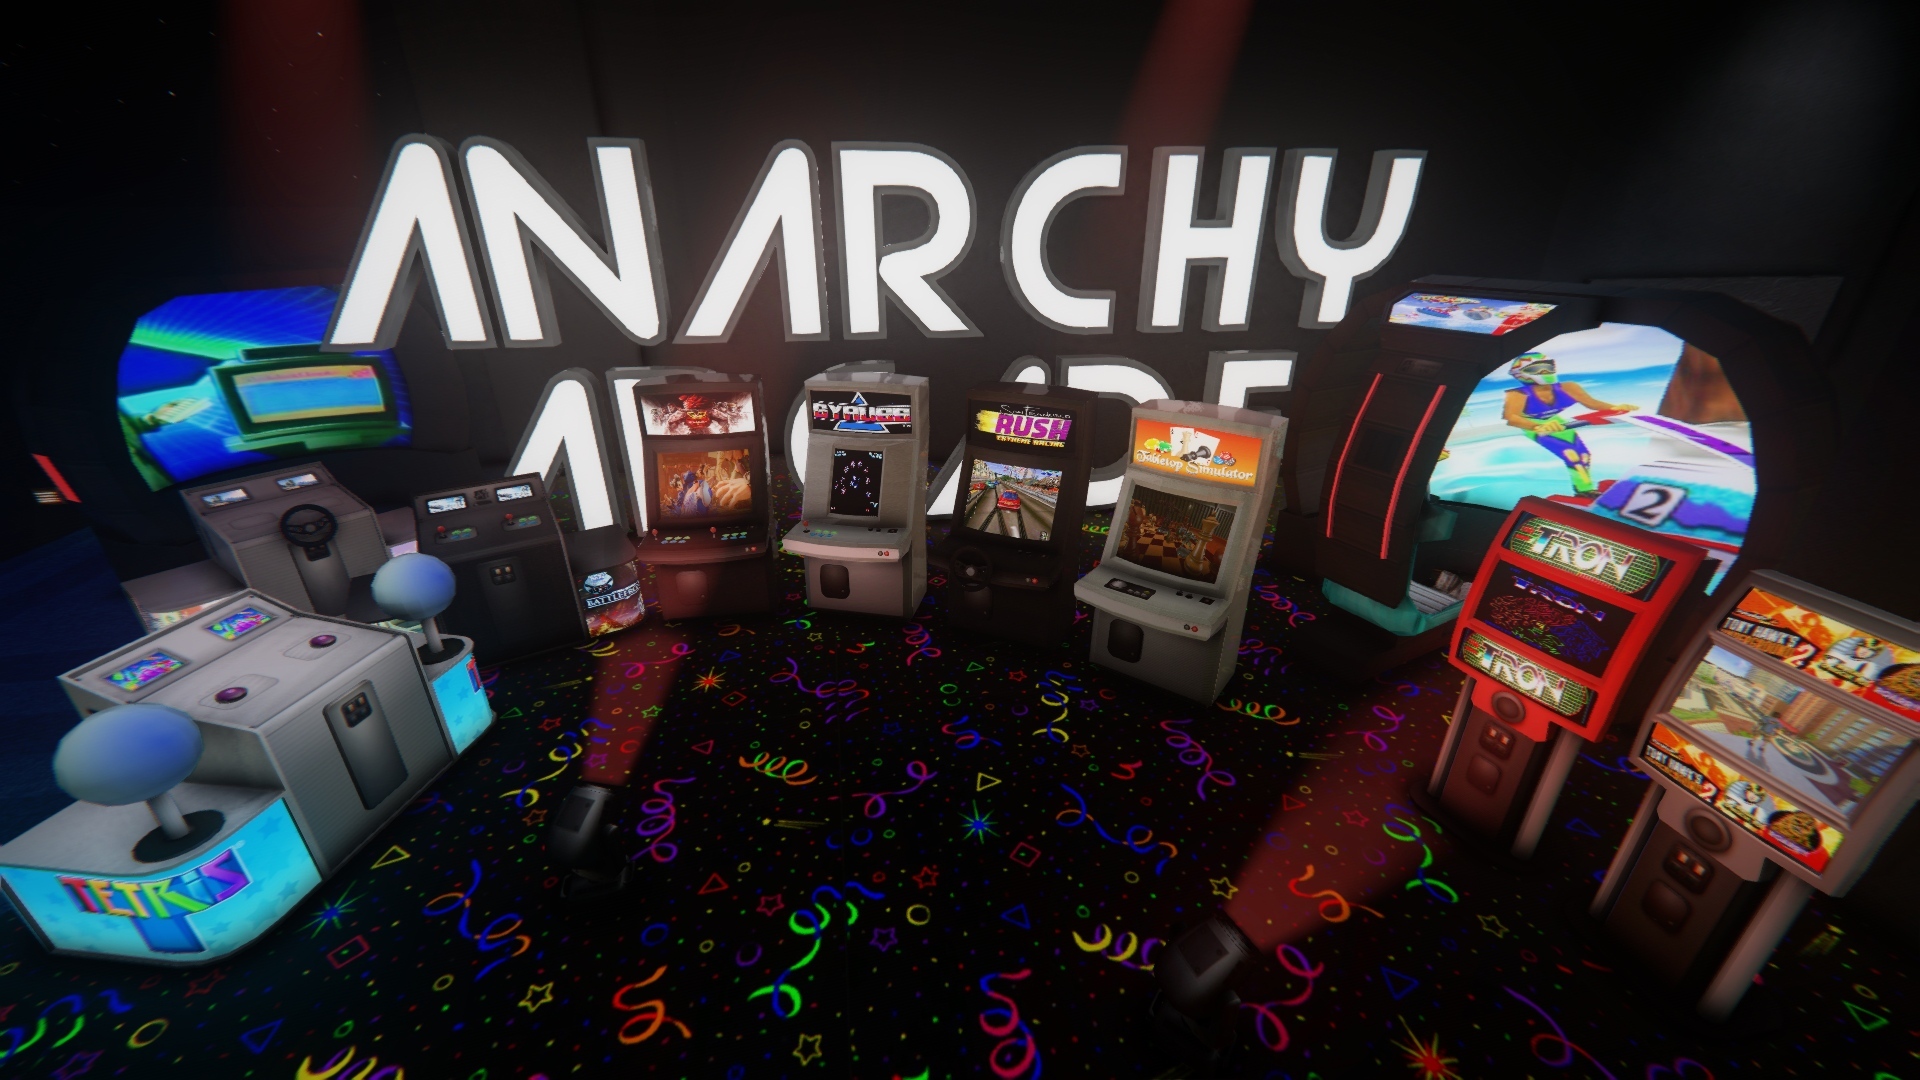 New Cabinet Models · Anarchy Arcade update for 26 January 2020 · SteamDB